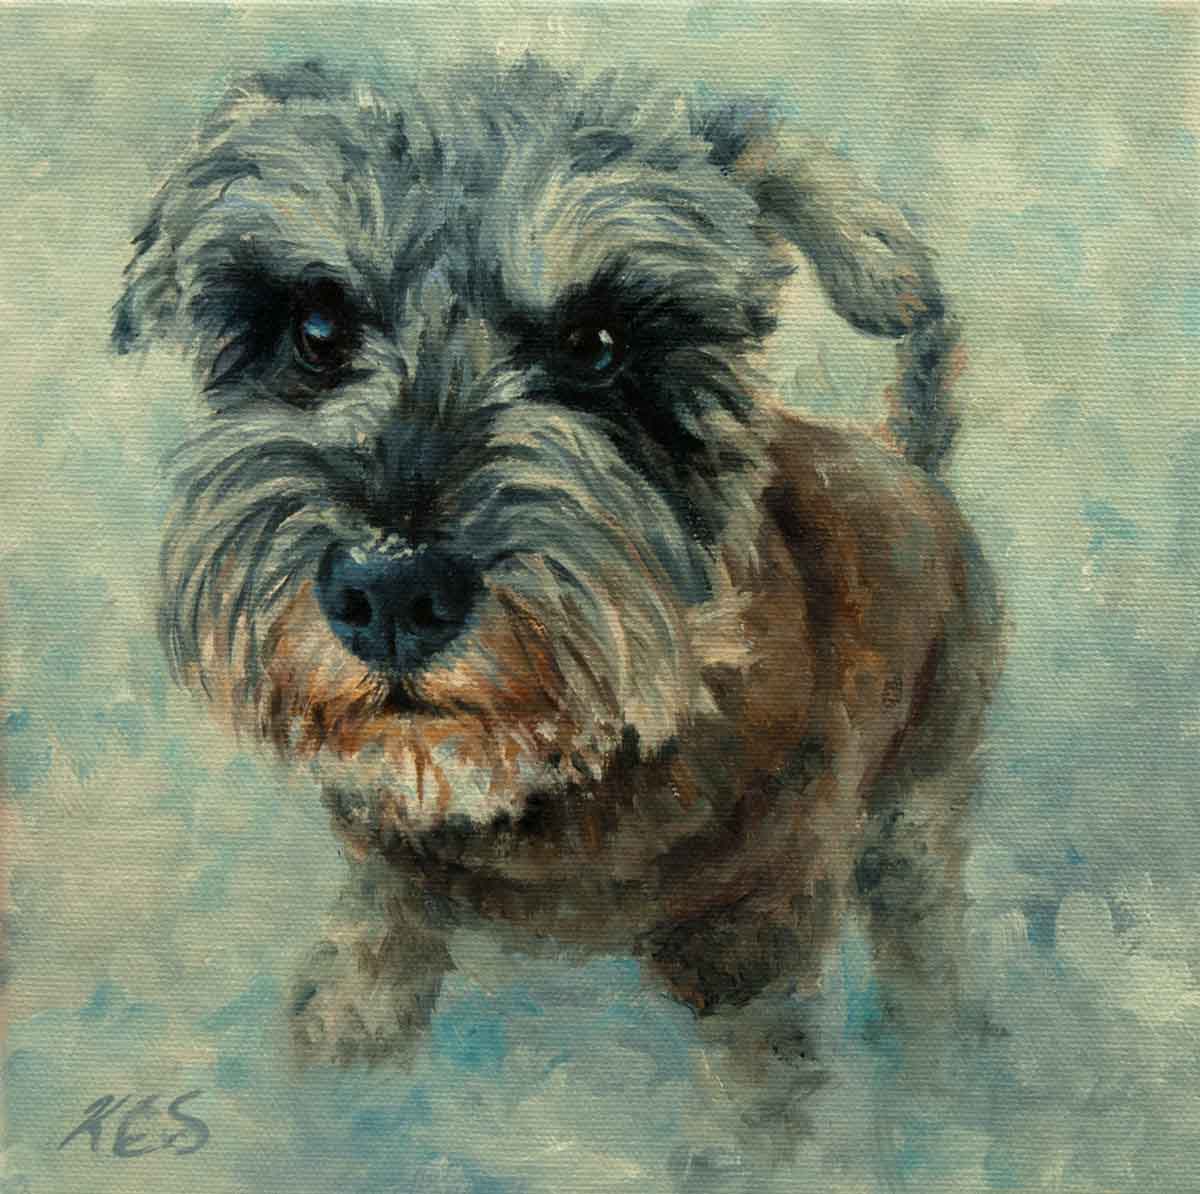 The Year of the Dog | Katherine Schuber Portrait Artist